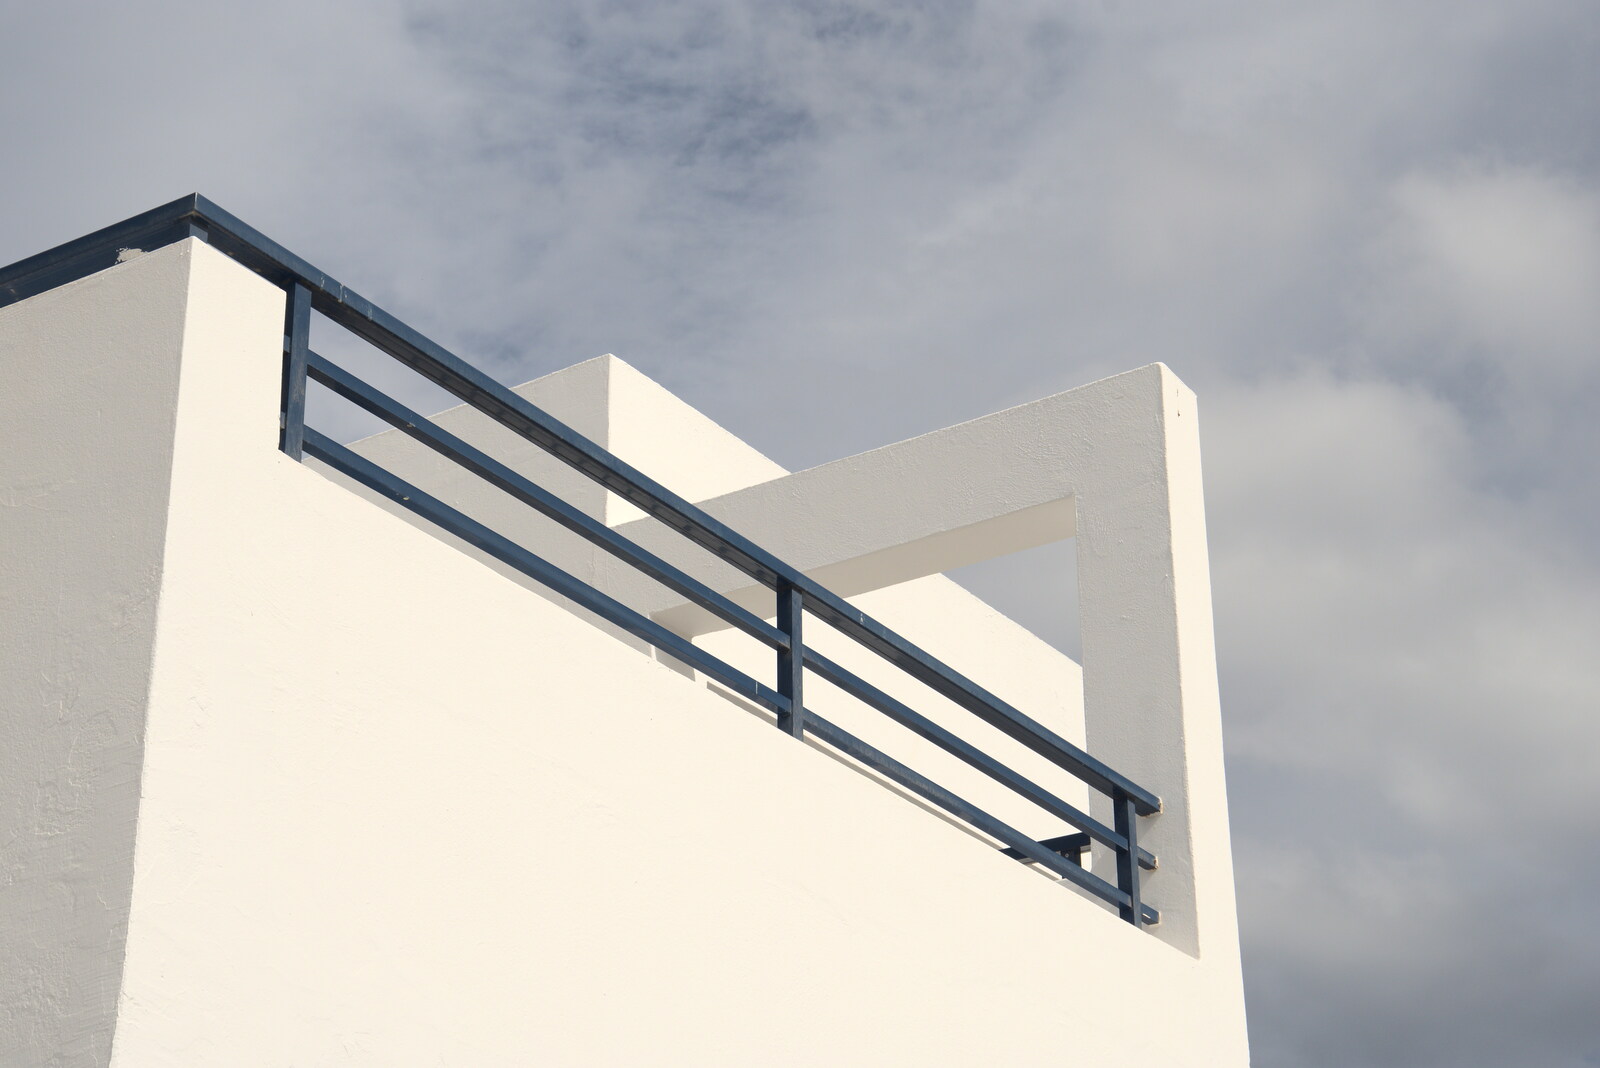 White-block building from Five Days in Lanzarote, Canary Islands, Spain - 24th October 2021